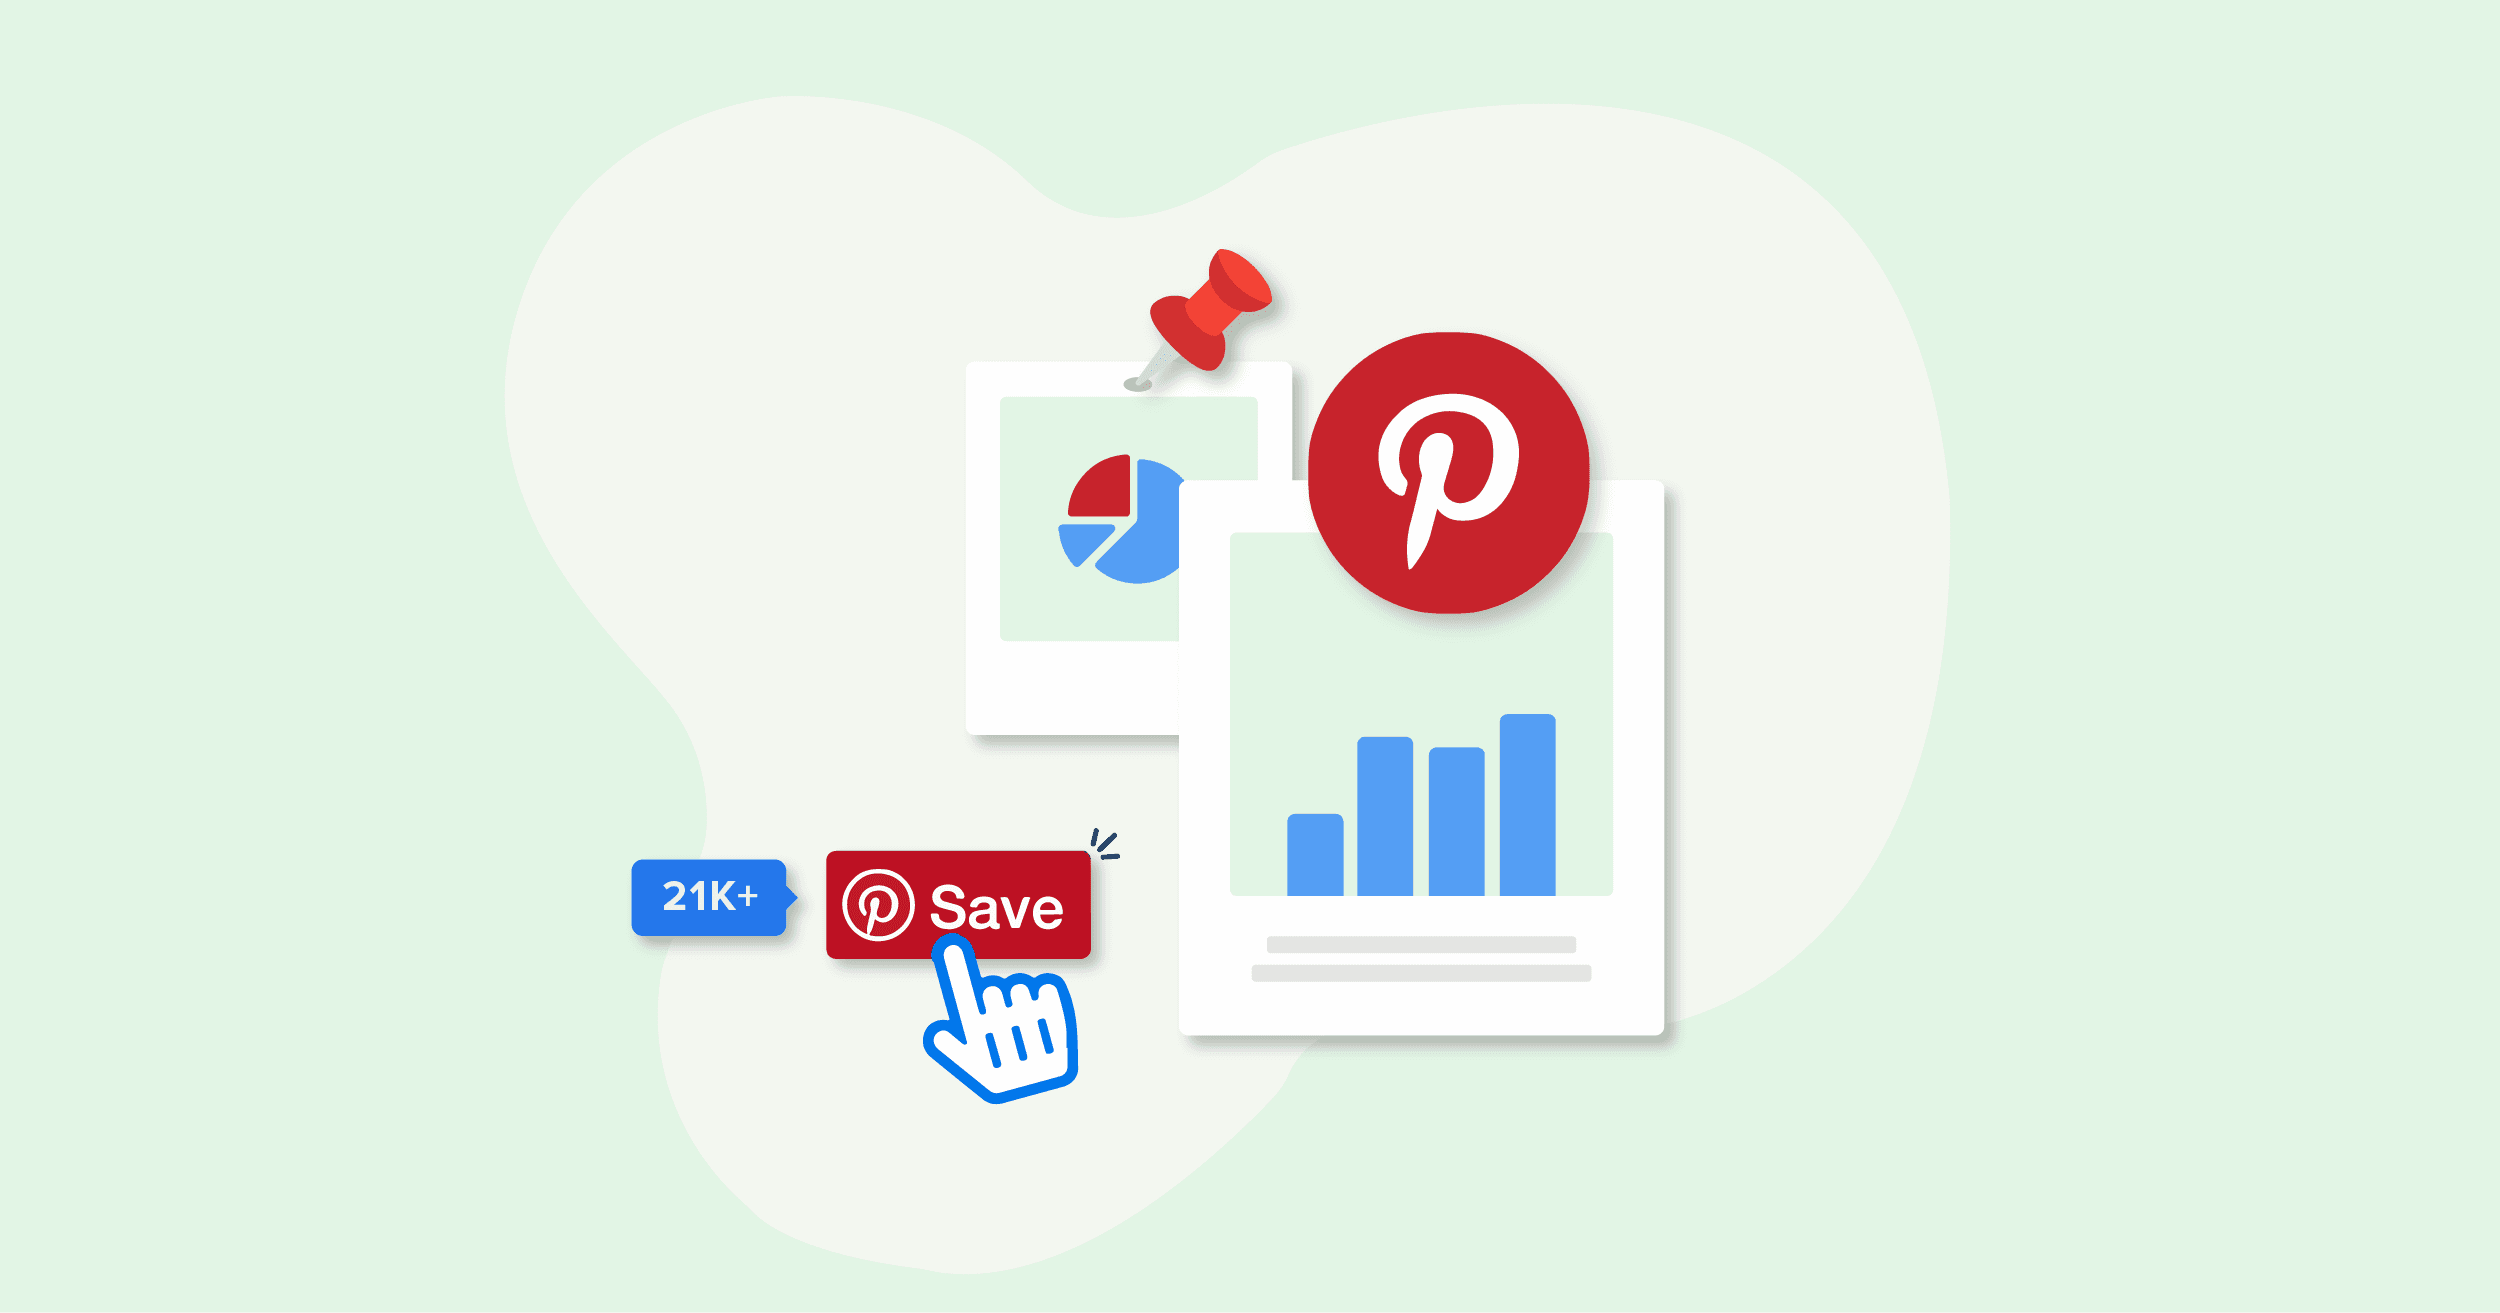 Guide to Pinterest Marketing